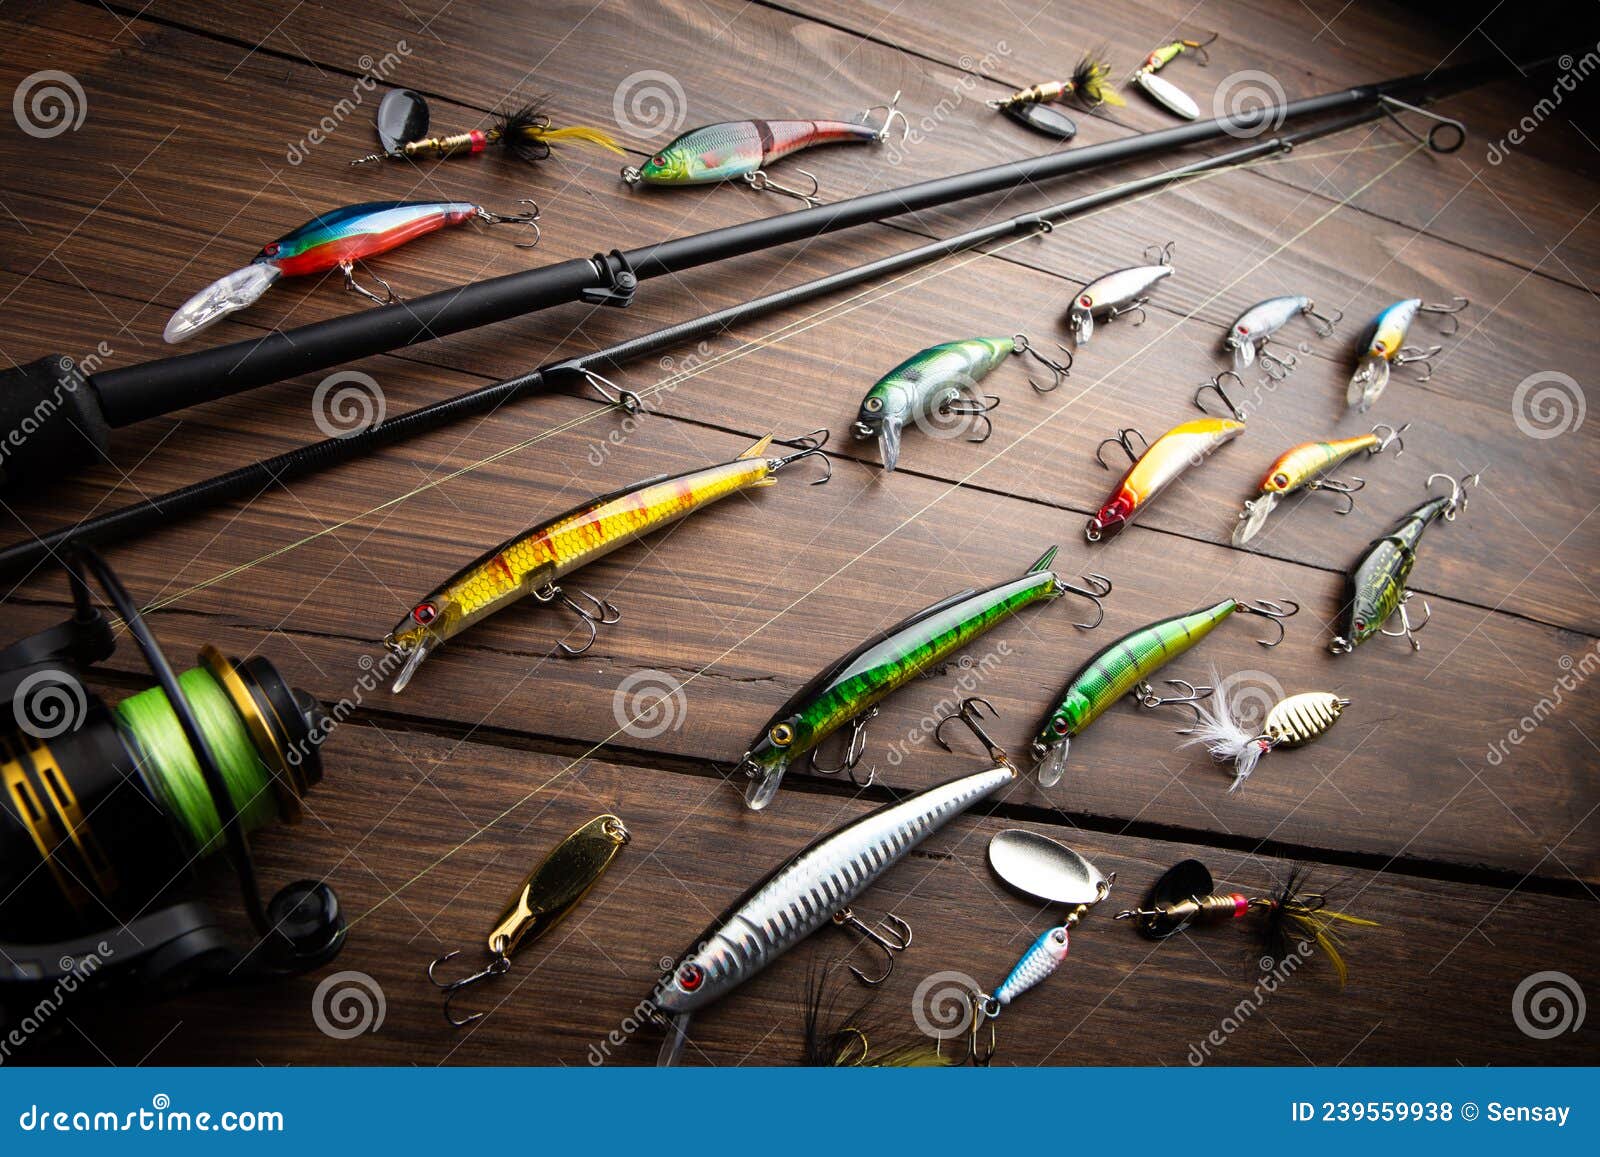 Fishing Tackle - Fishing Spinning Rod, Hooks and Lures on Wooden